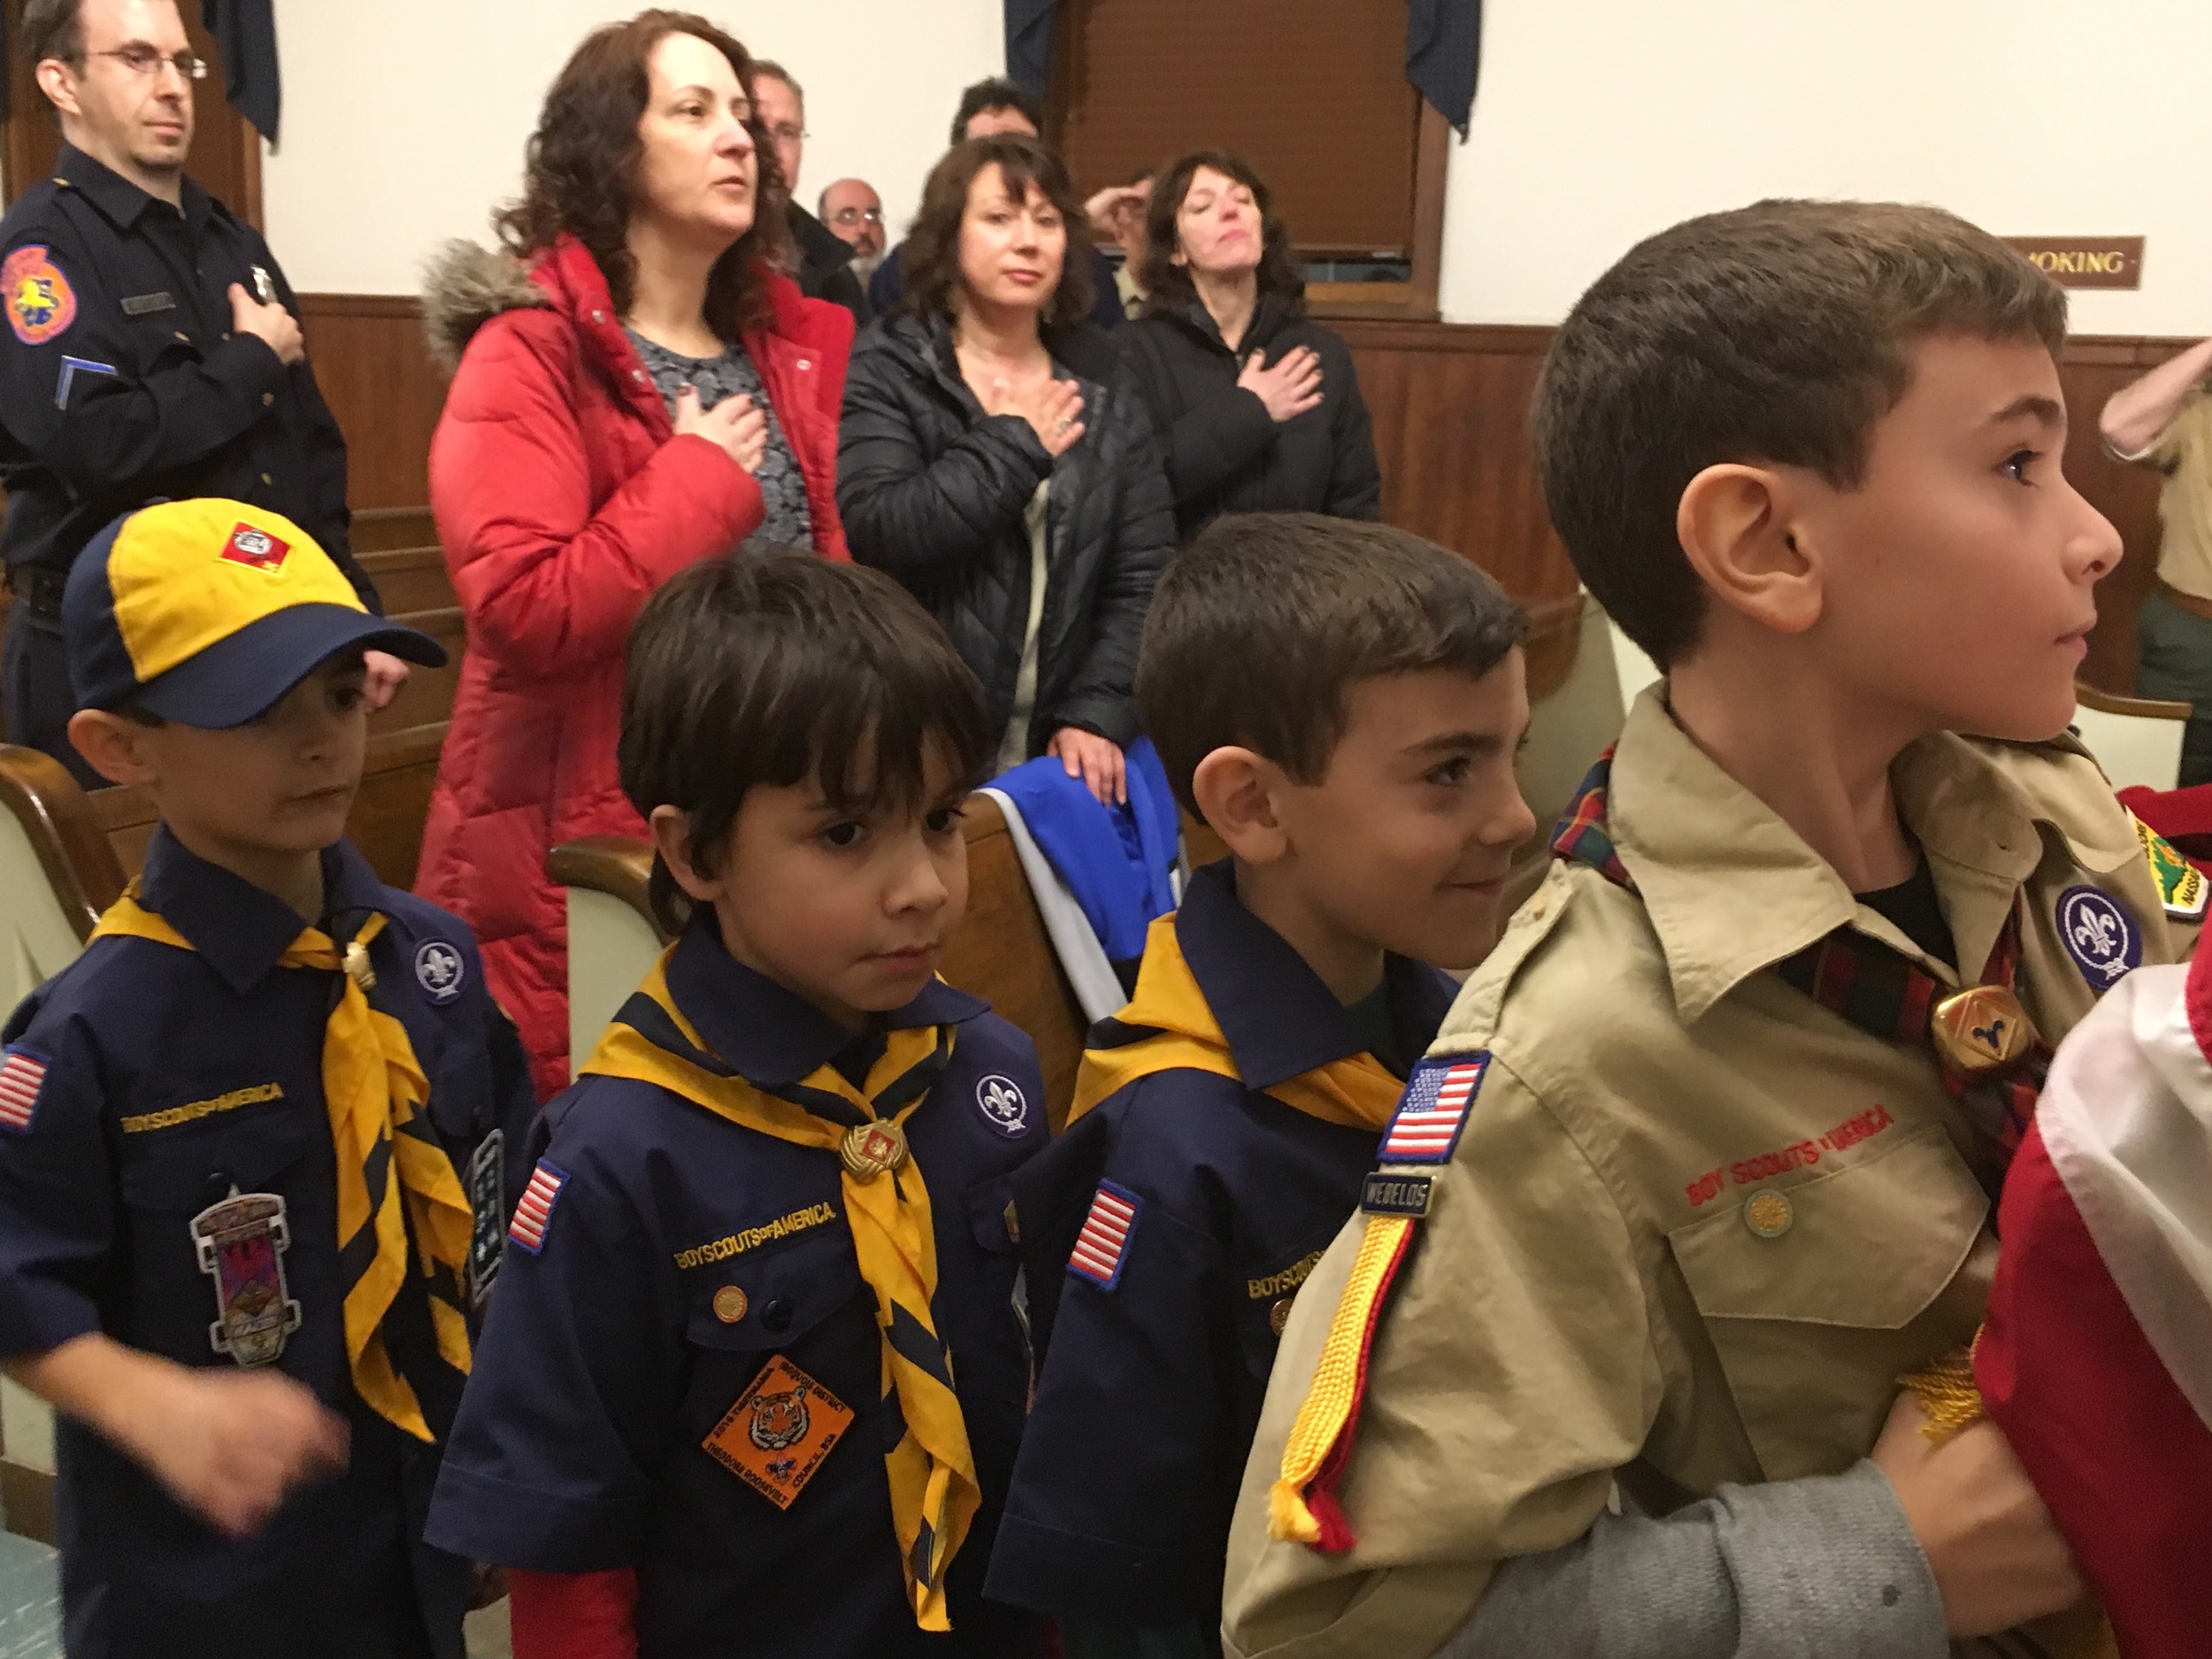 Boy Scouts led the Pledge of Allegiance at the Feb. 13 East Rockaway village board meeting.